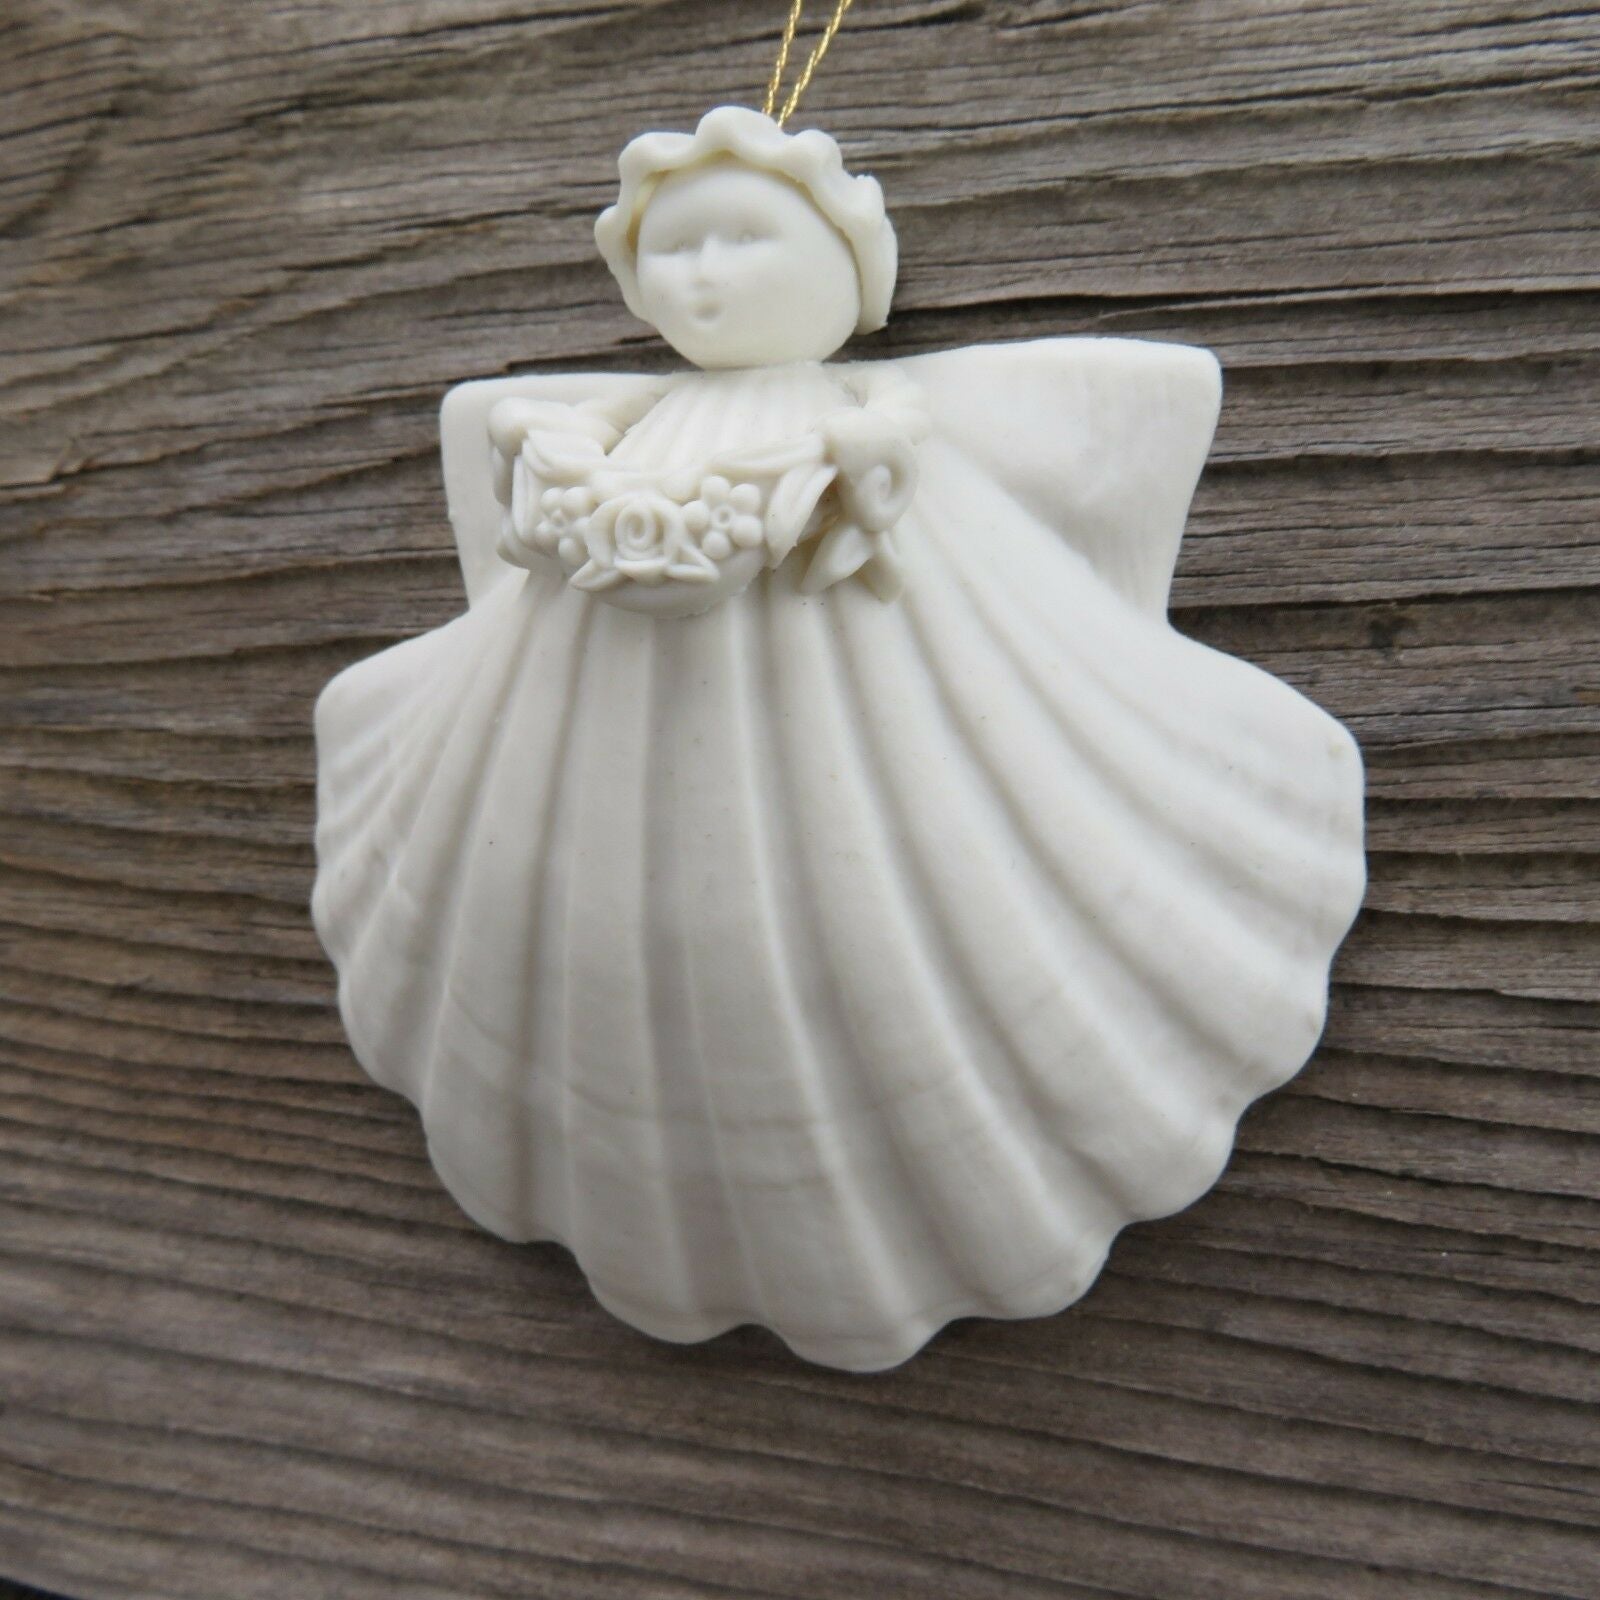 Shell Angel Garland Ornament Vintage Christmas Margaret Furlong 1995 Bisque 3 In - At Grandma's Table